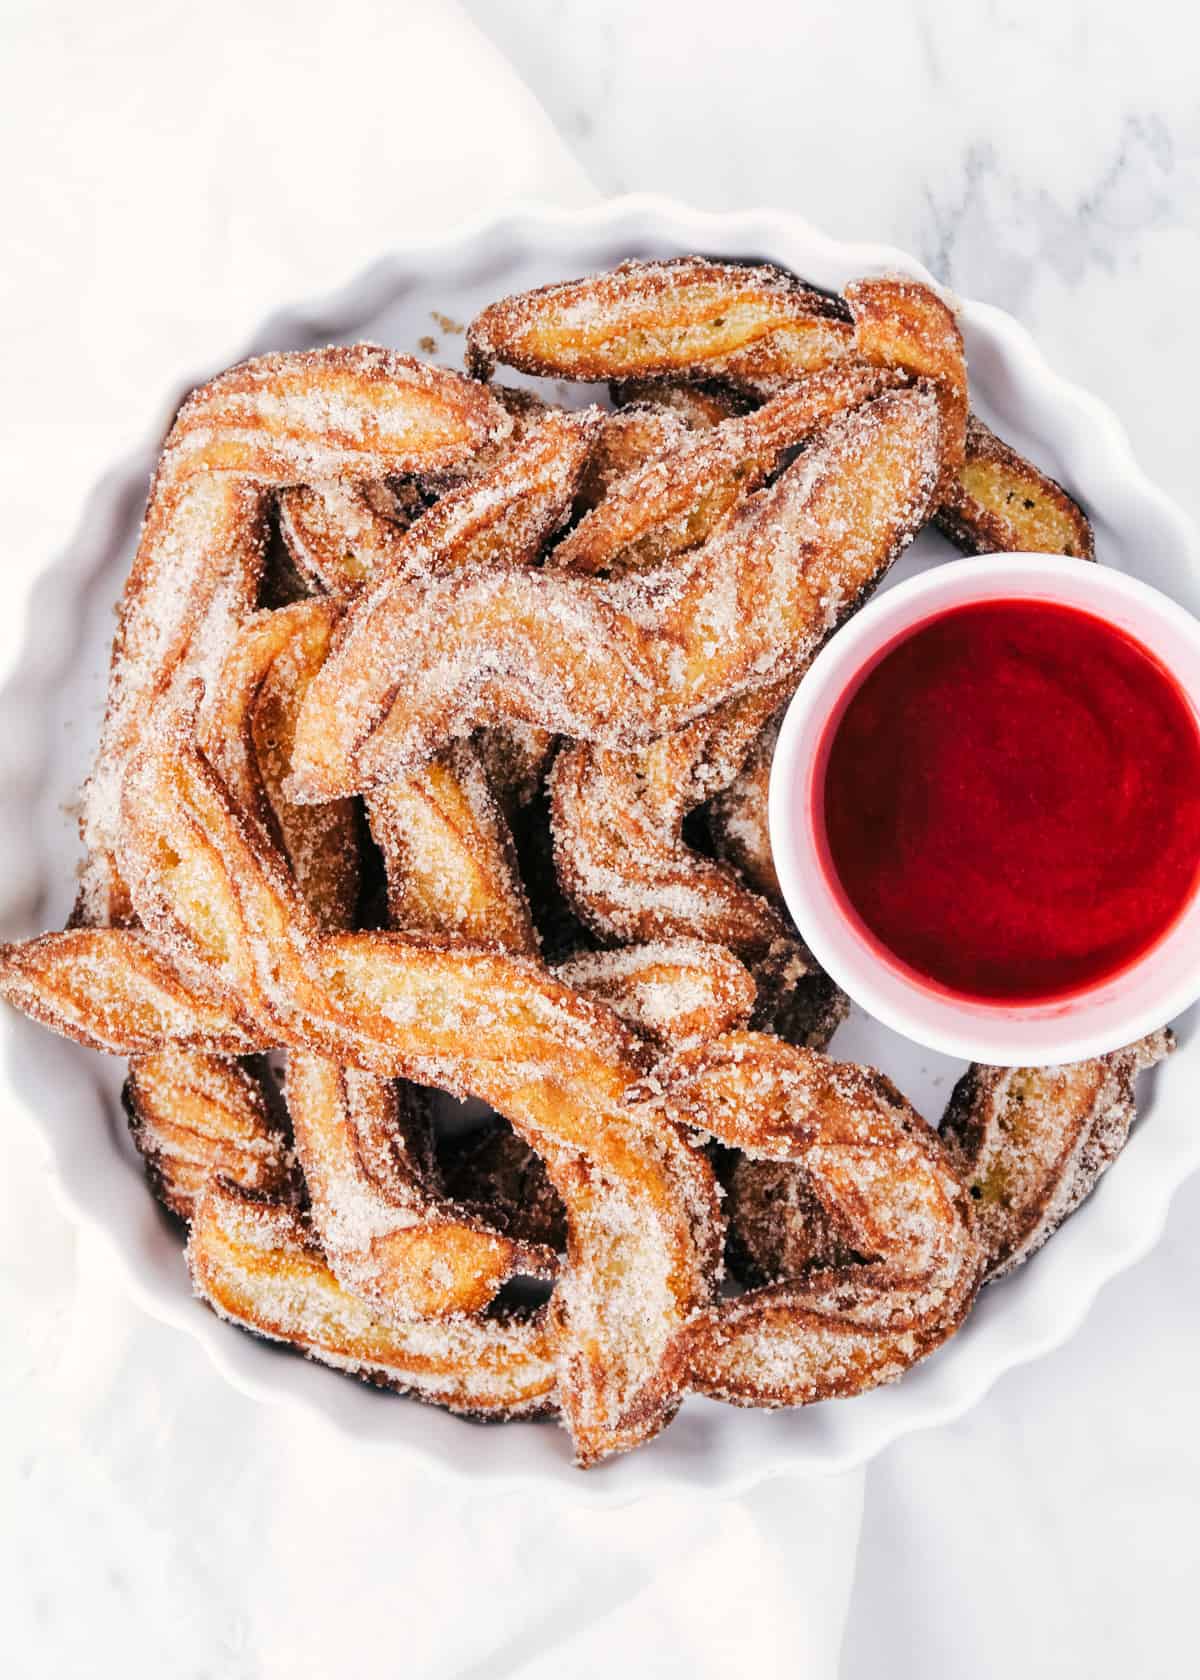 Homemade churros on a white plate.